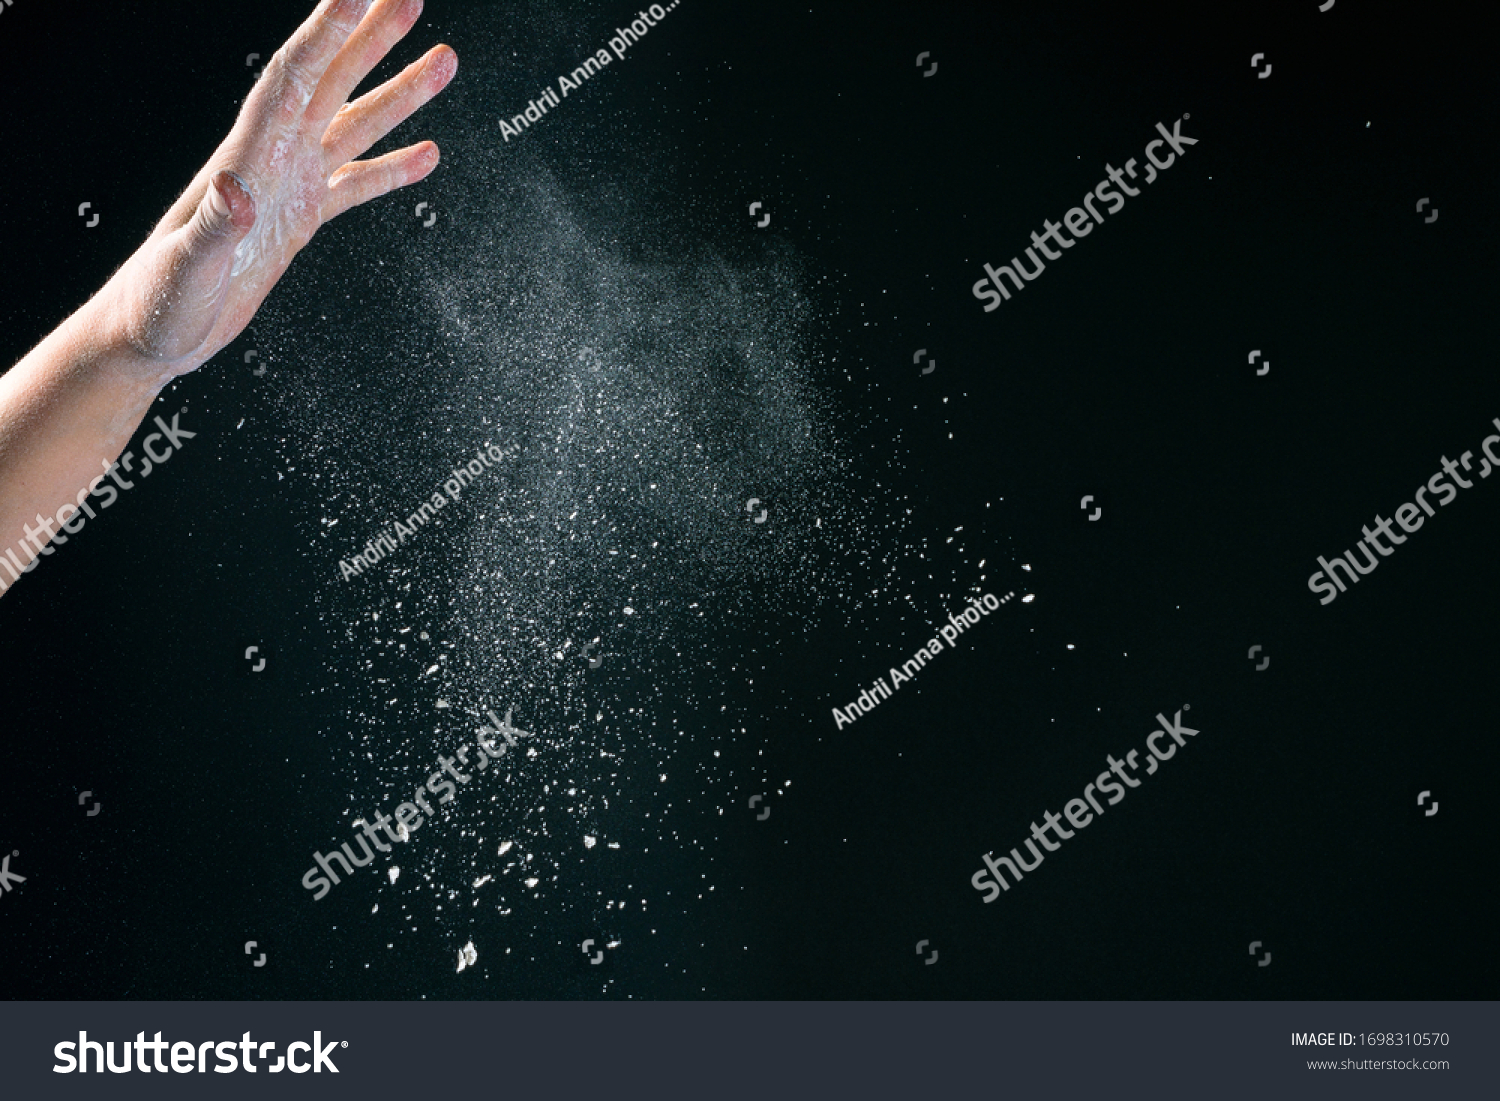 Hand of european woman chef in kitchen pouring flour on black background #1698310570